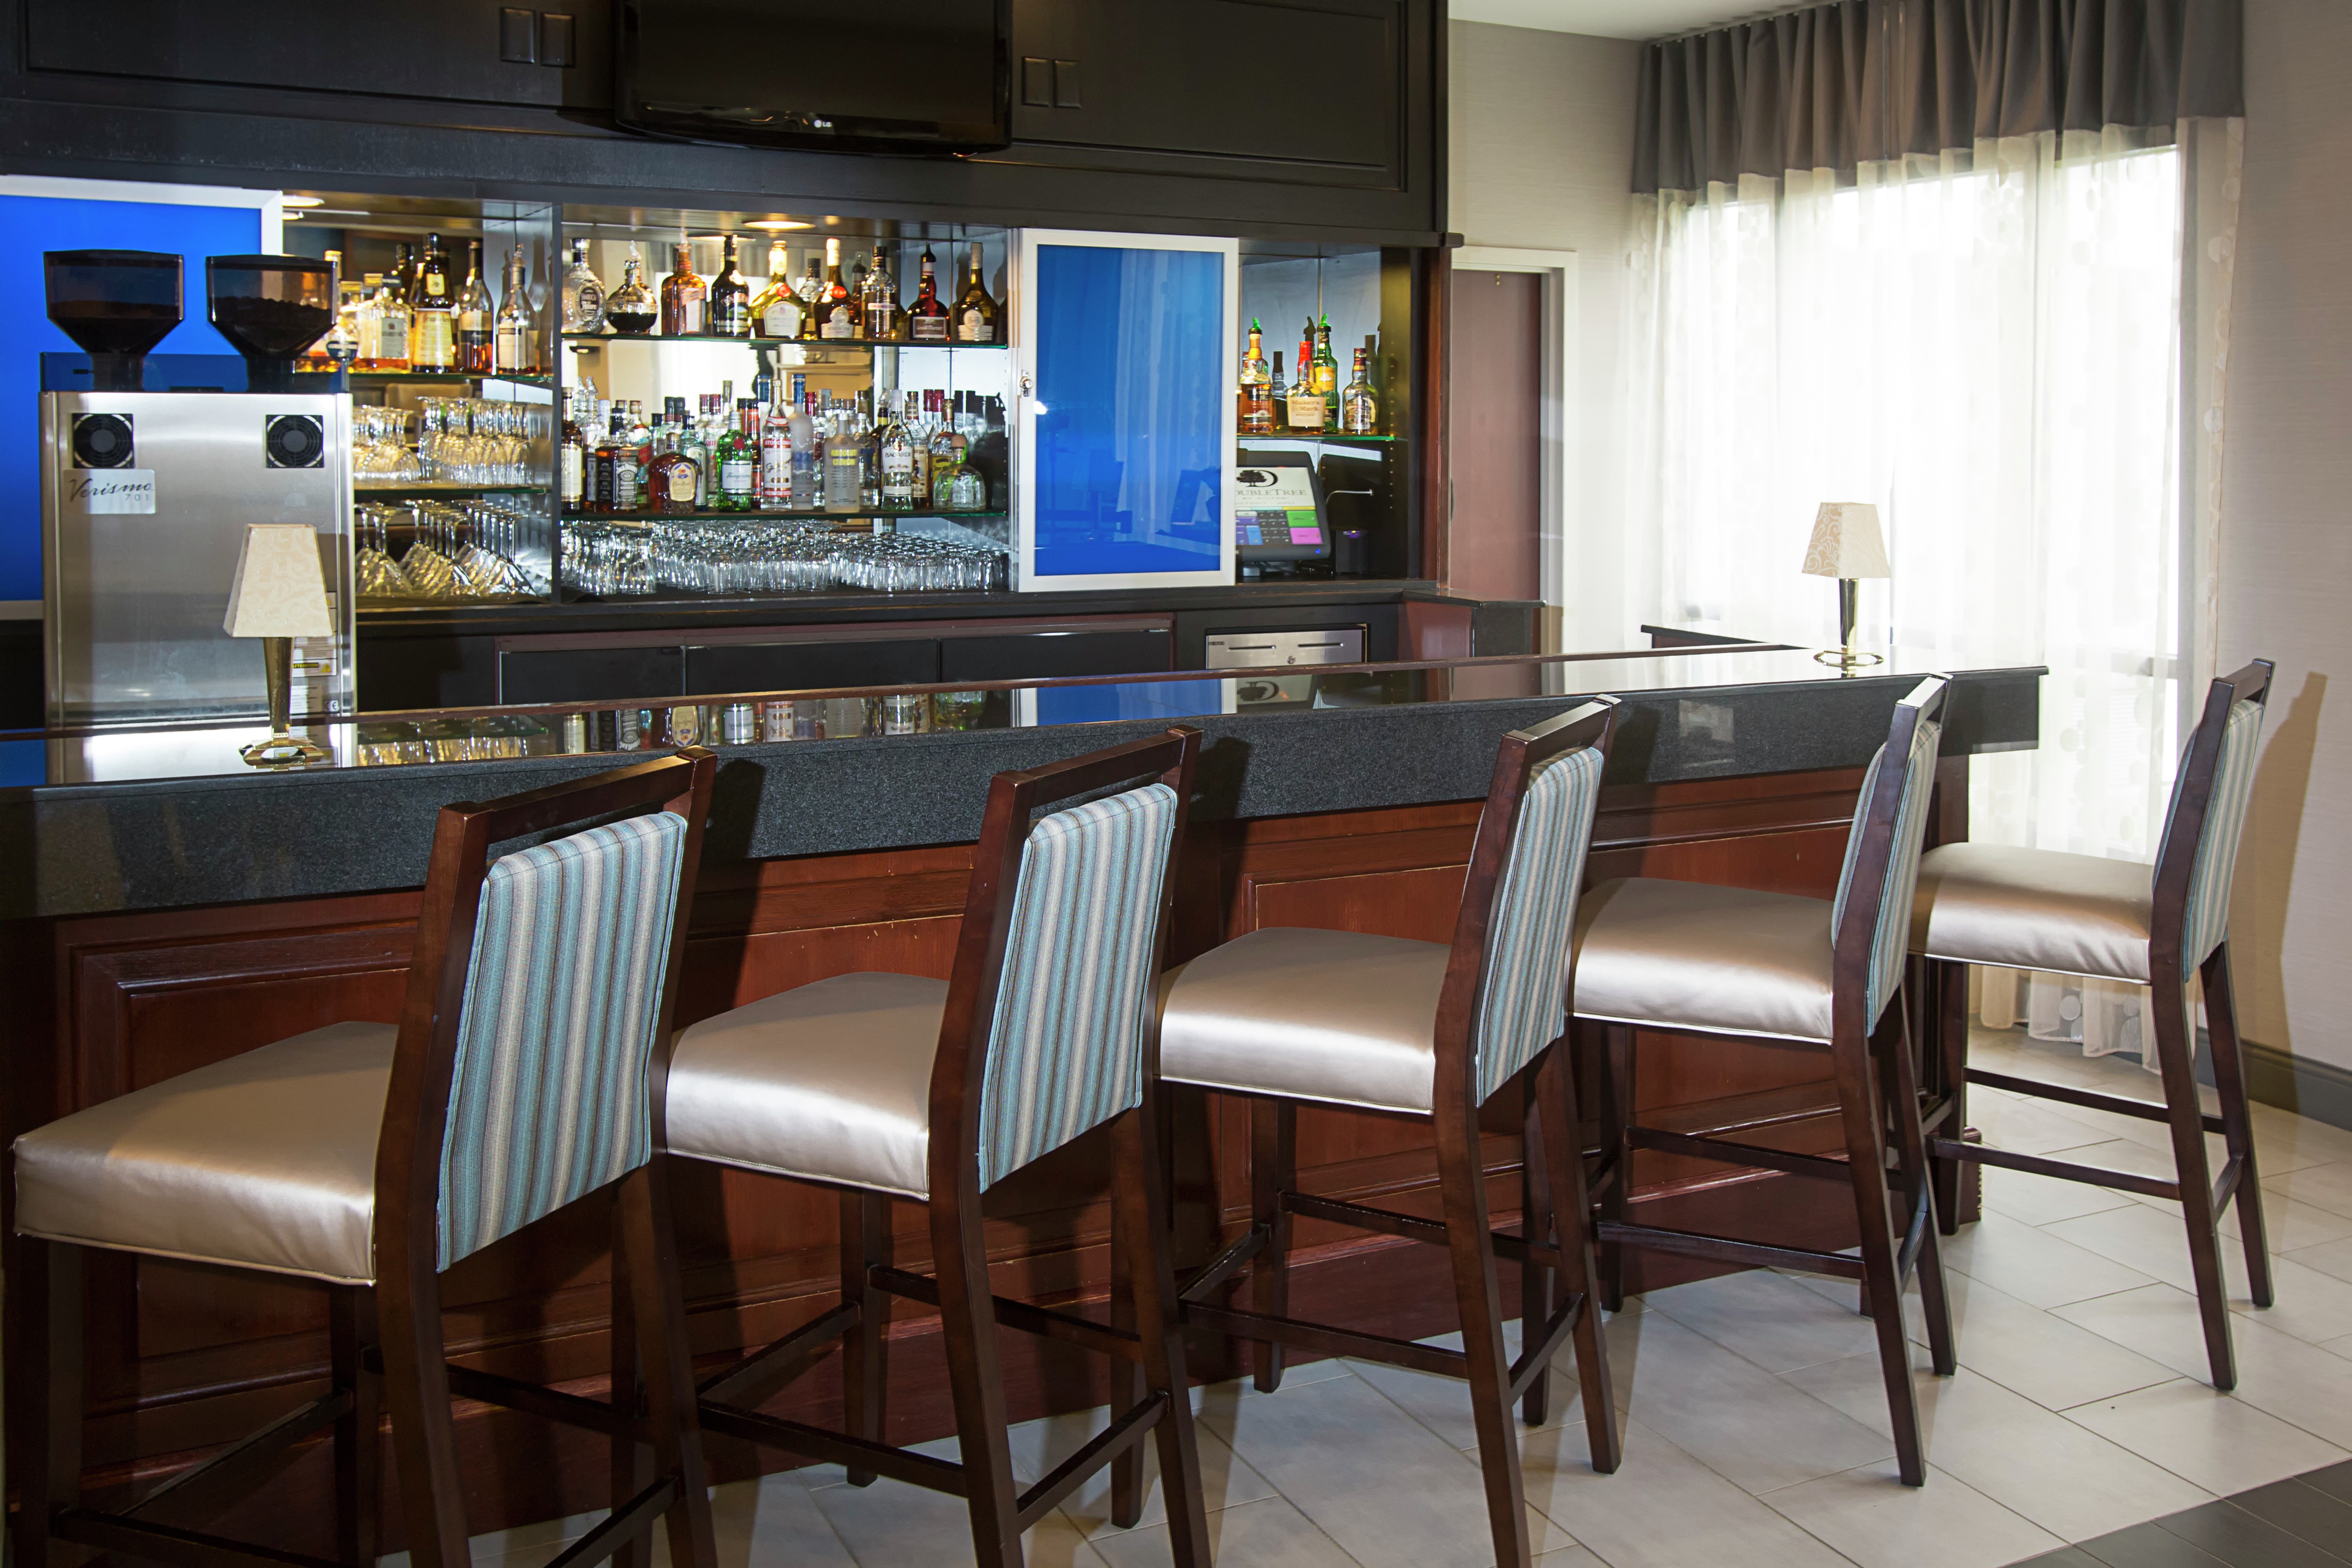 Bar stools in front of stylish bar with bottles and window in background